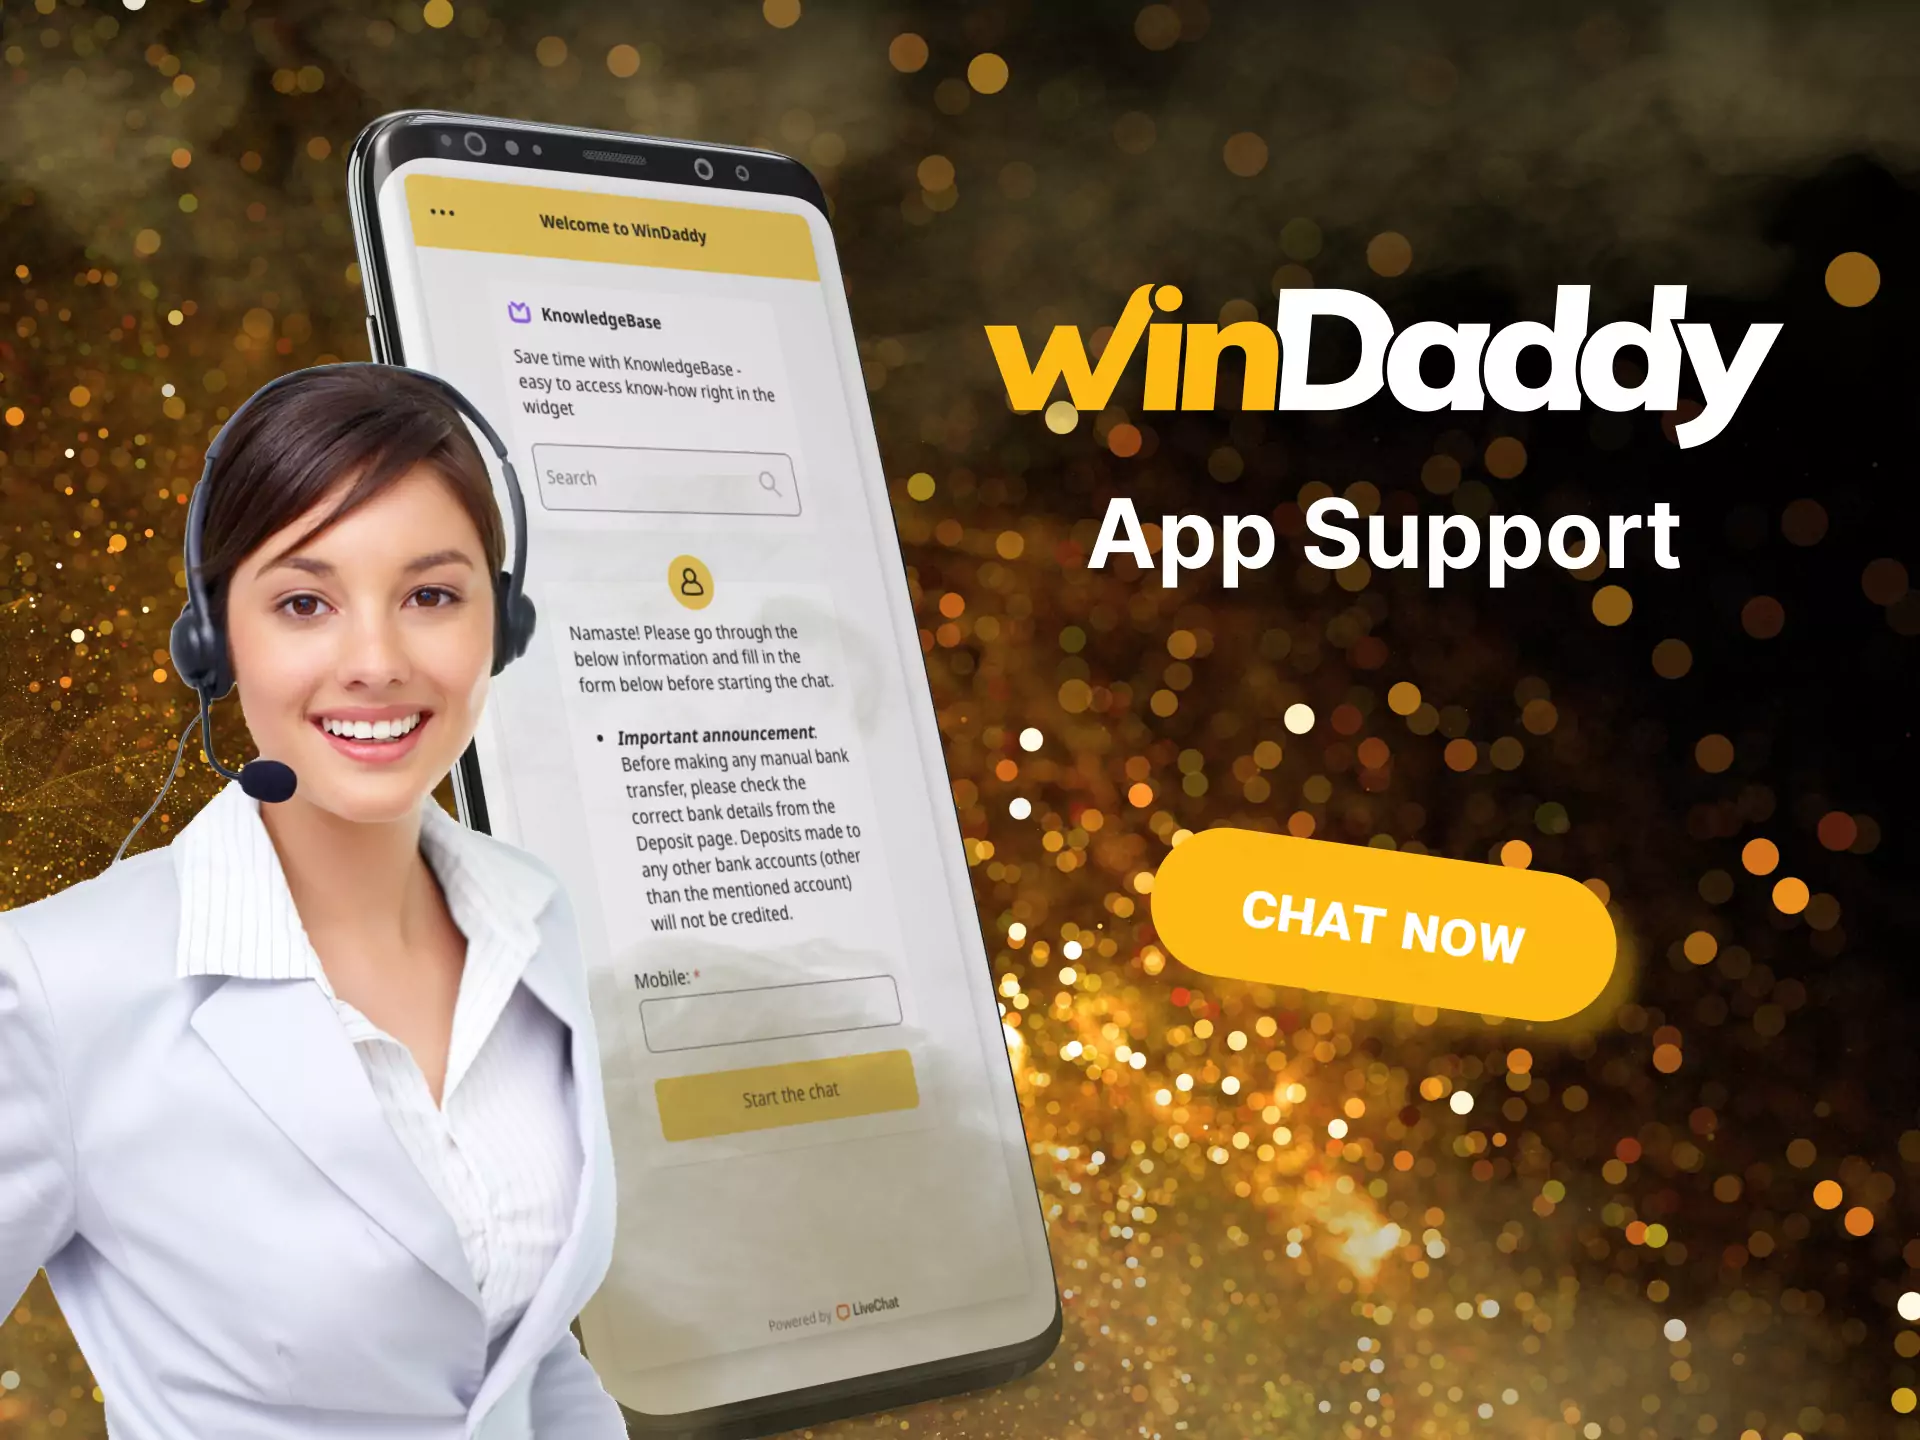 If you have any questions, contact Windaddy support, they will always be able to help.